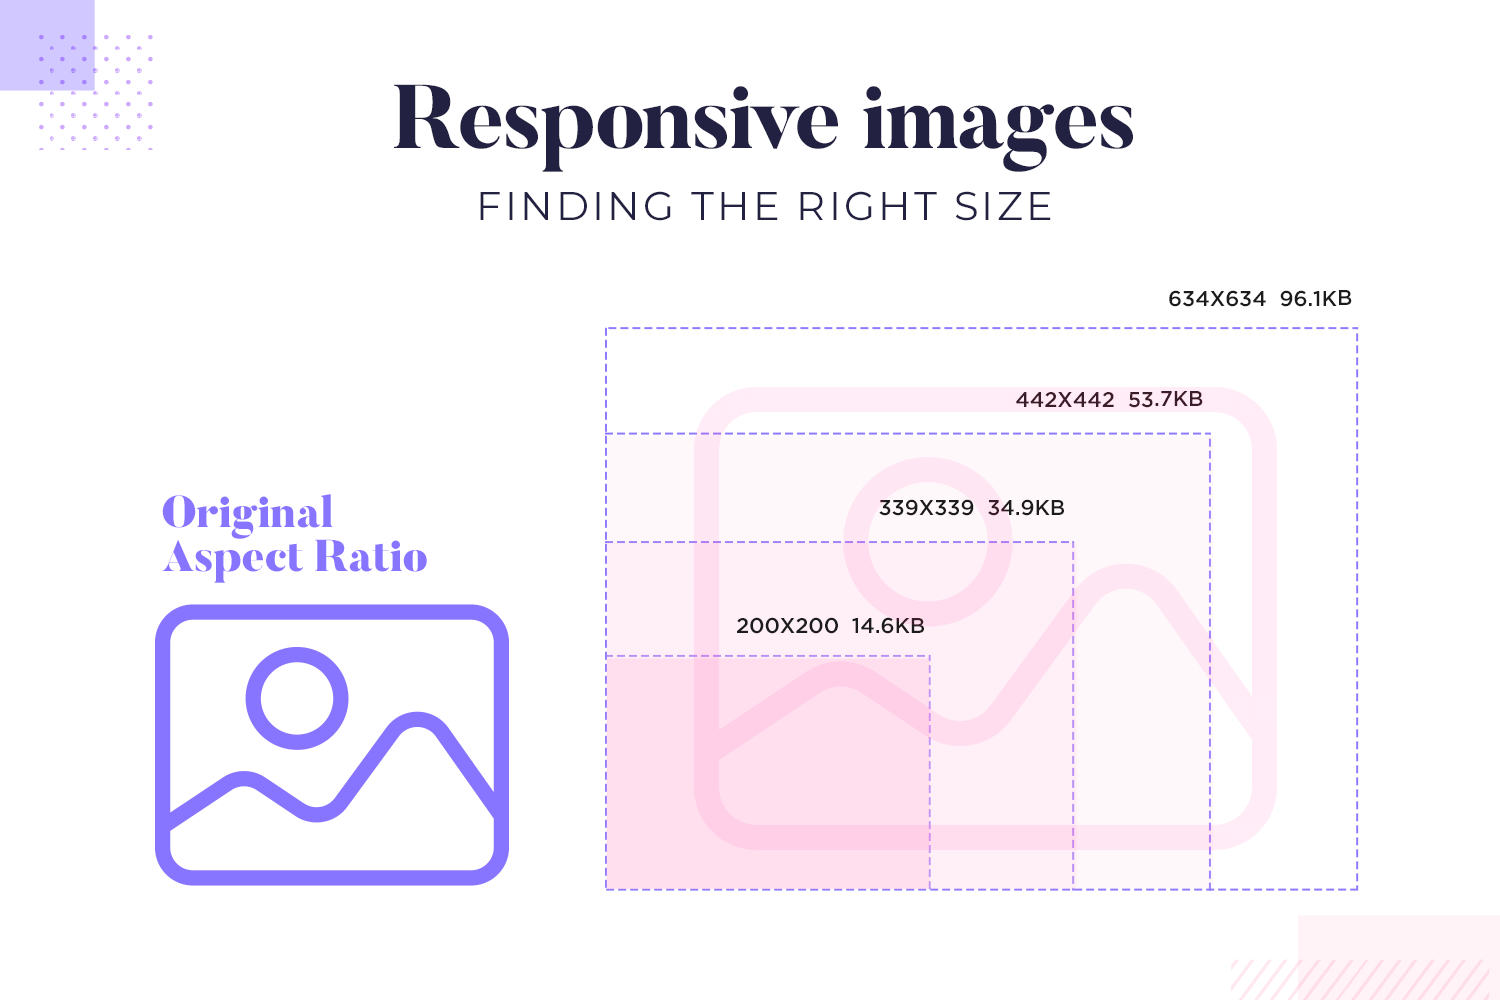 Responsive images with different sizes